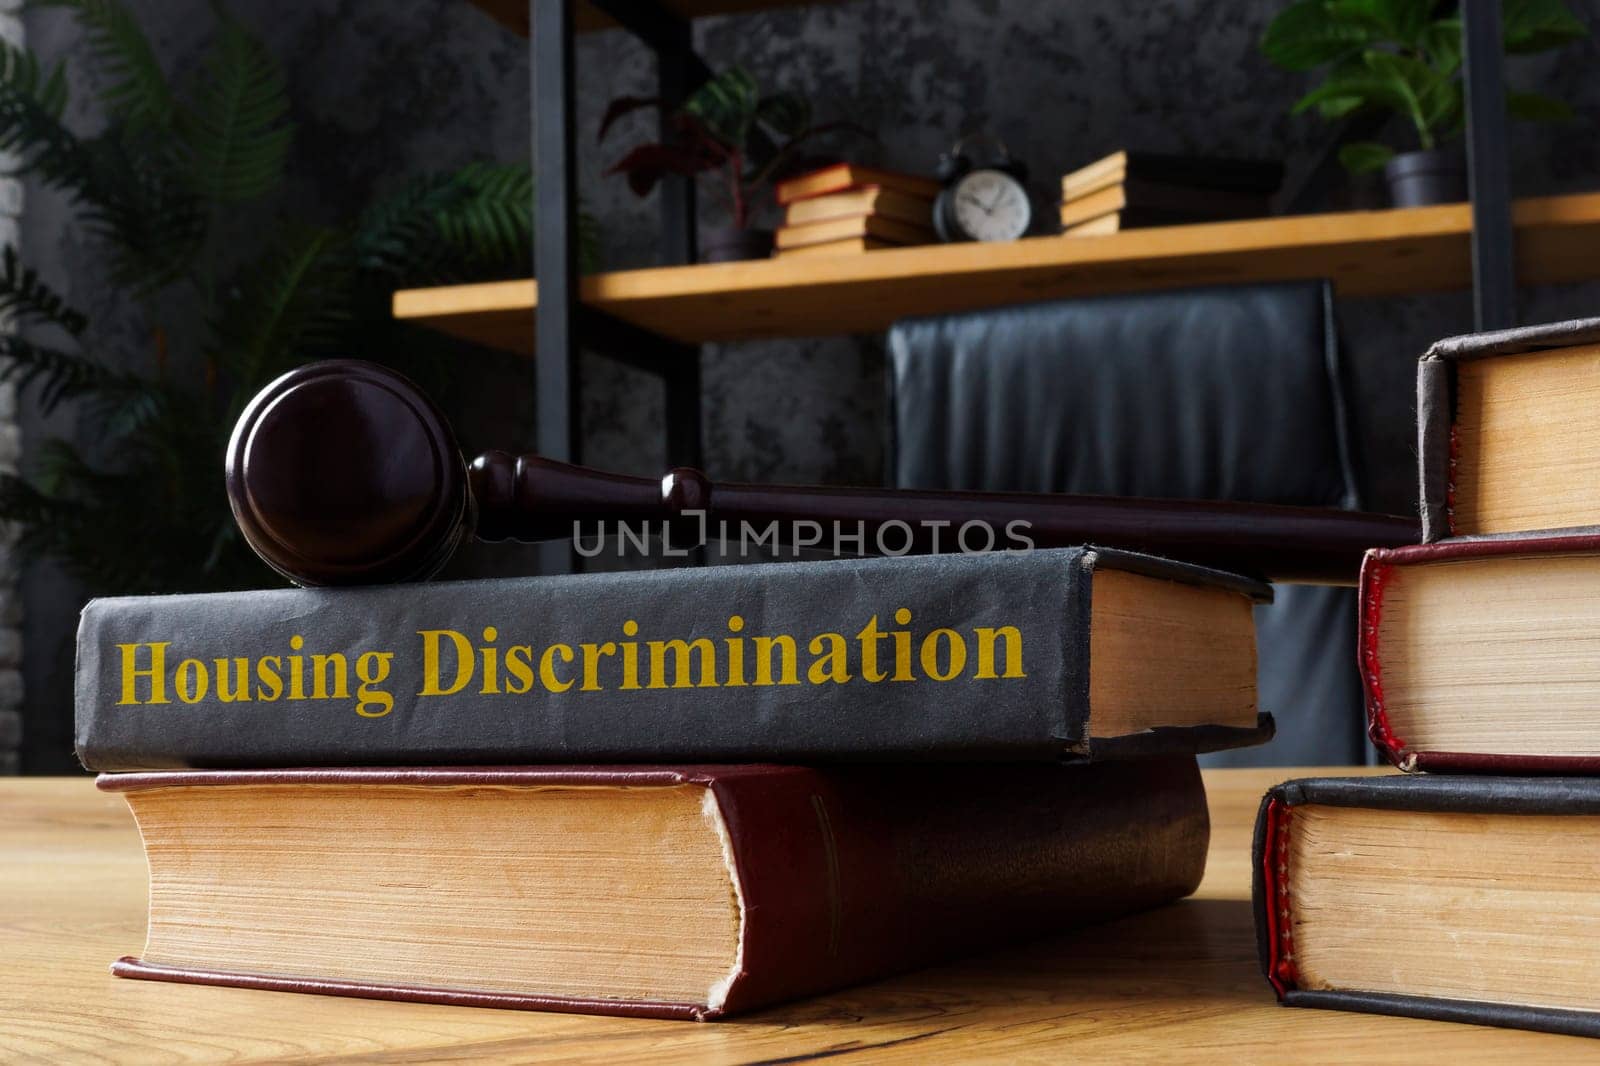 Book with housing discrimination law and gavel. by designer491